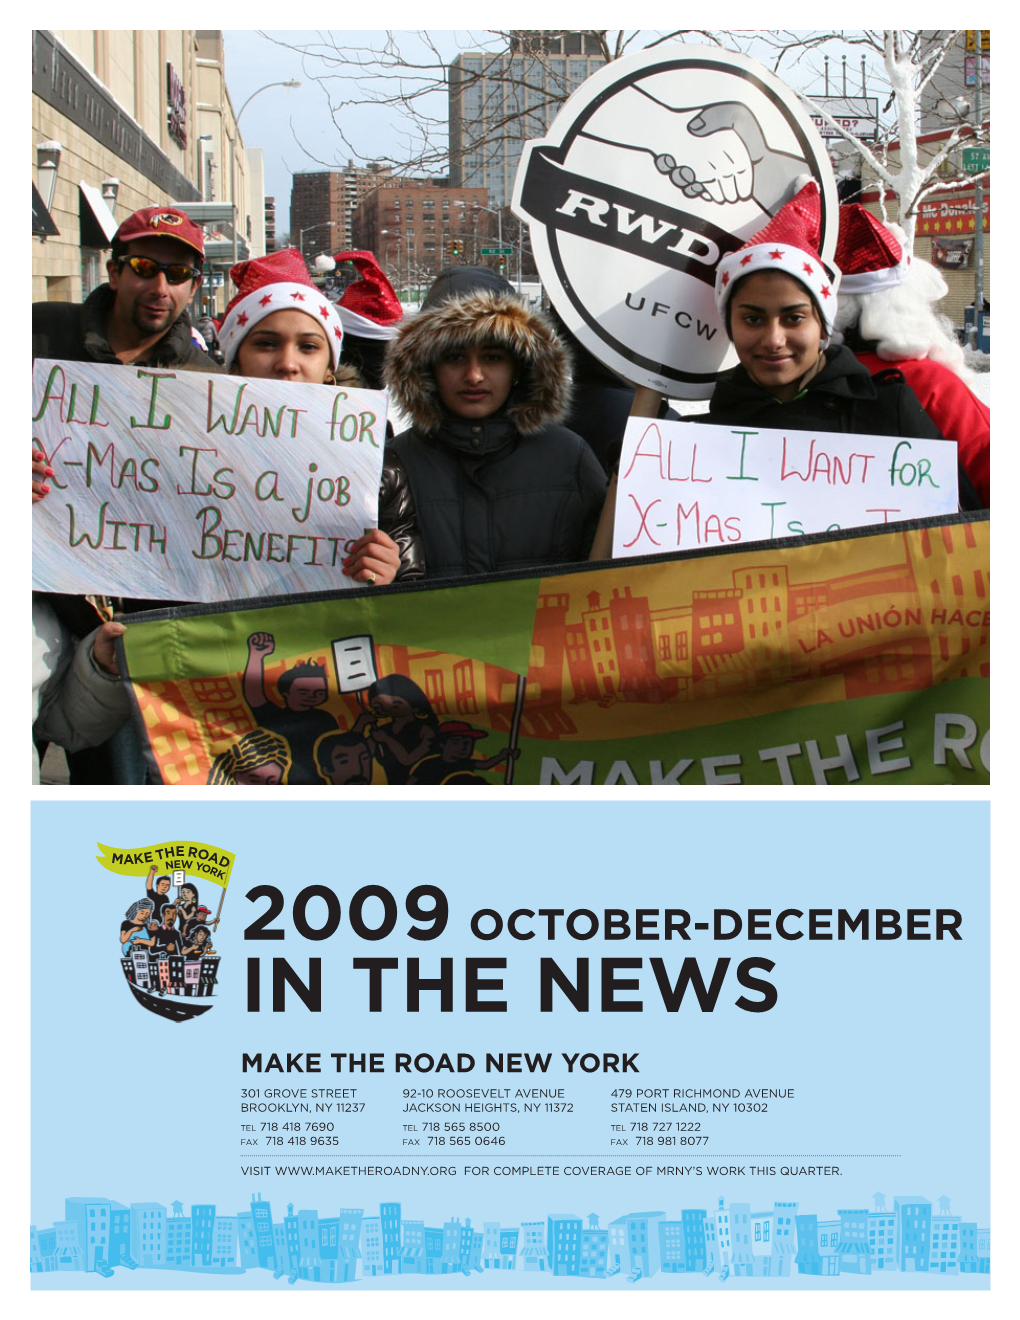 In the News 2009